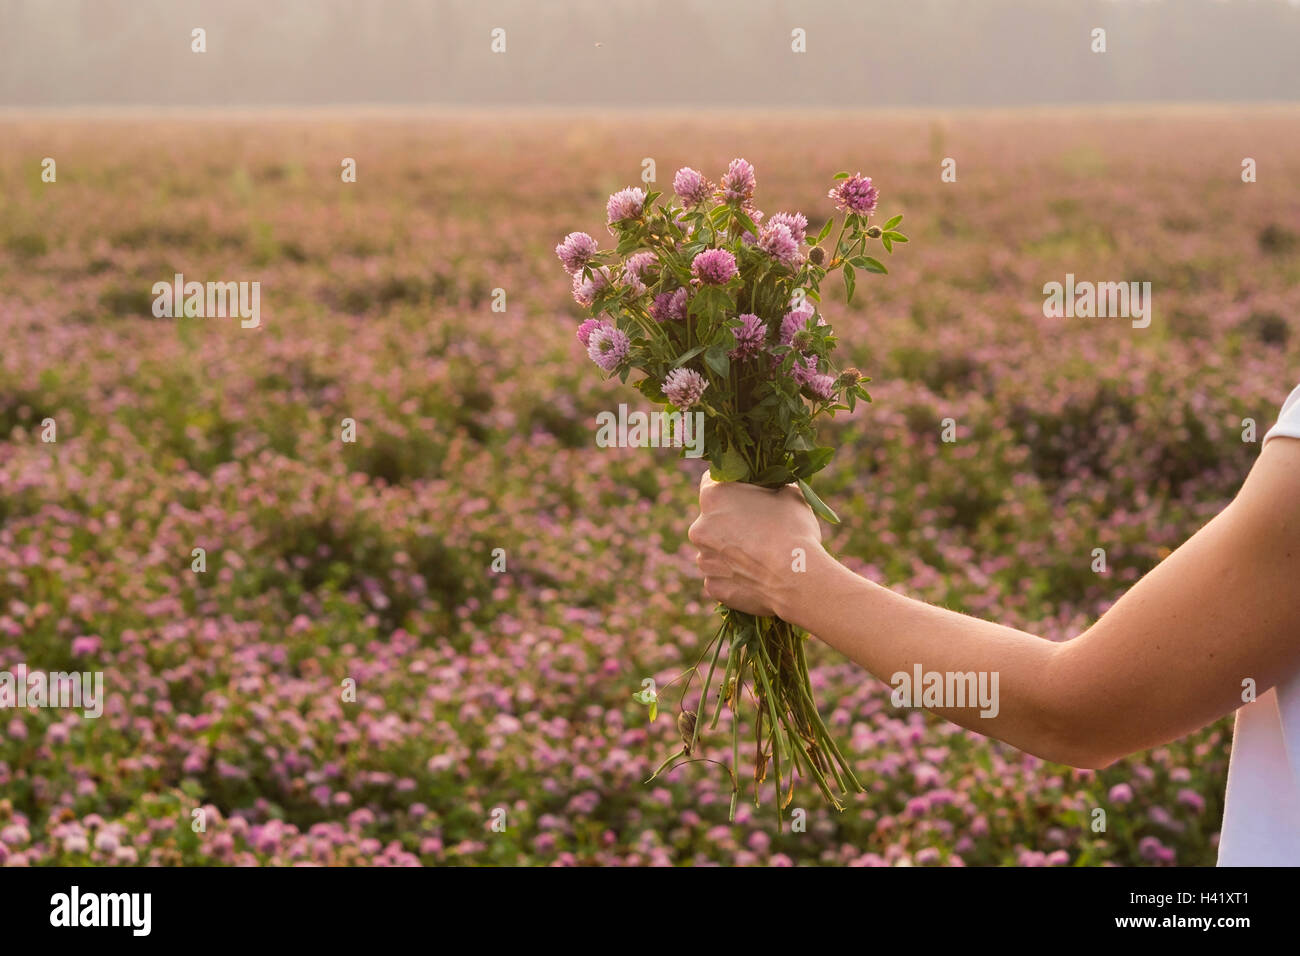 Caucasian woman holding bouquet of flowers in field Banque D'Images